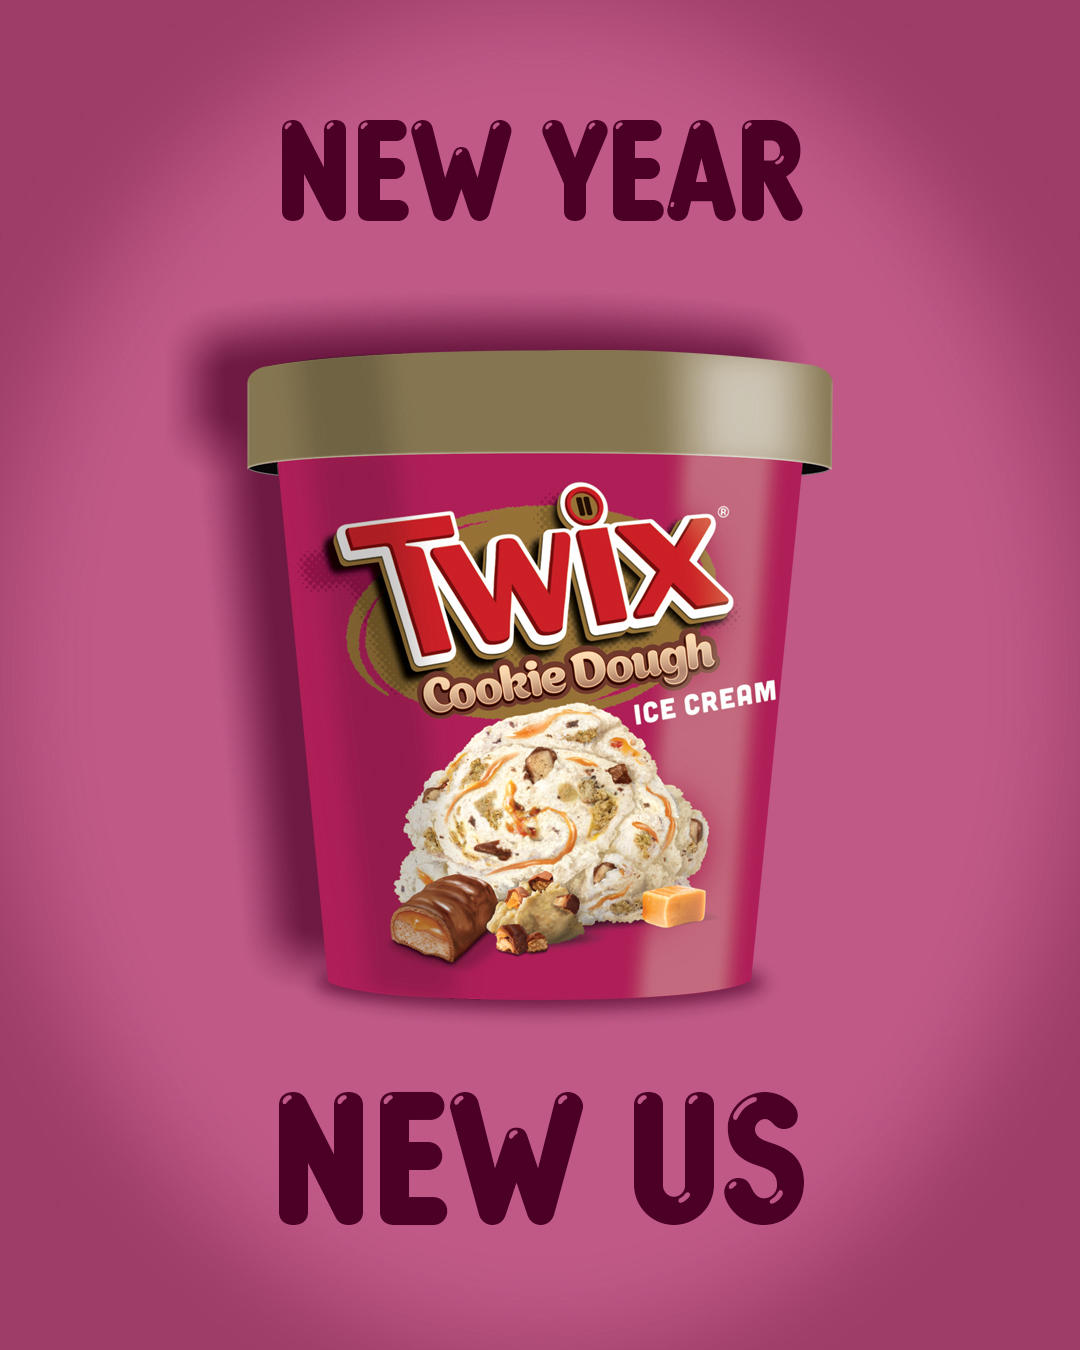 Kicking off the new year with the NEW TWIX Cookie Dough Ice Cream